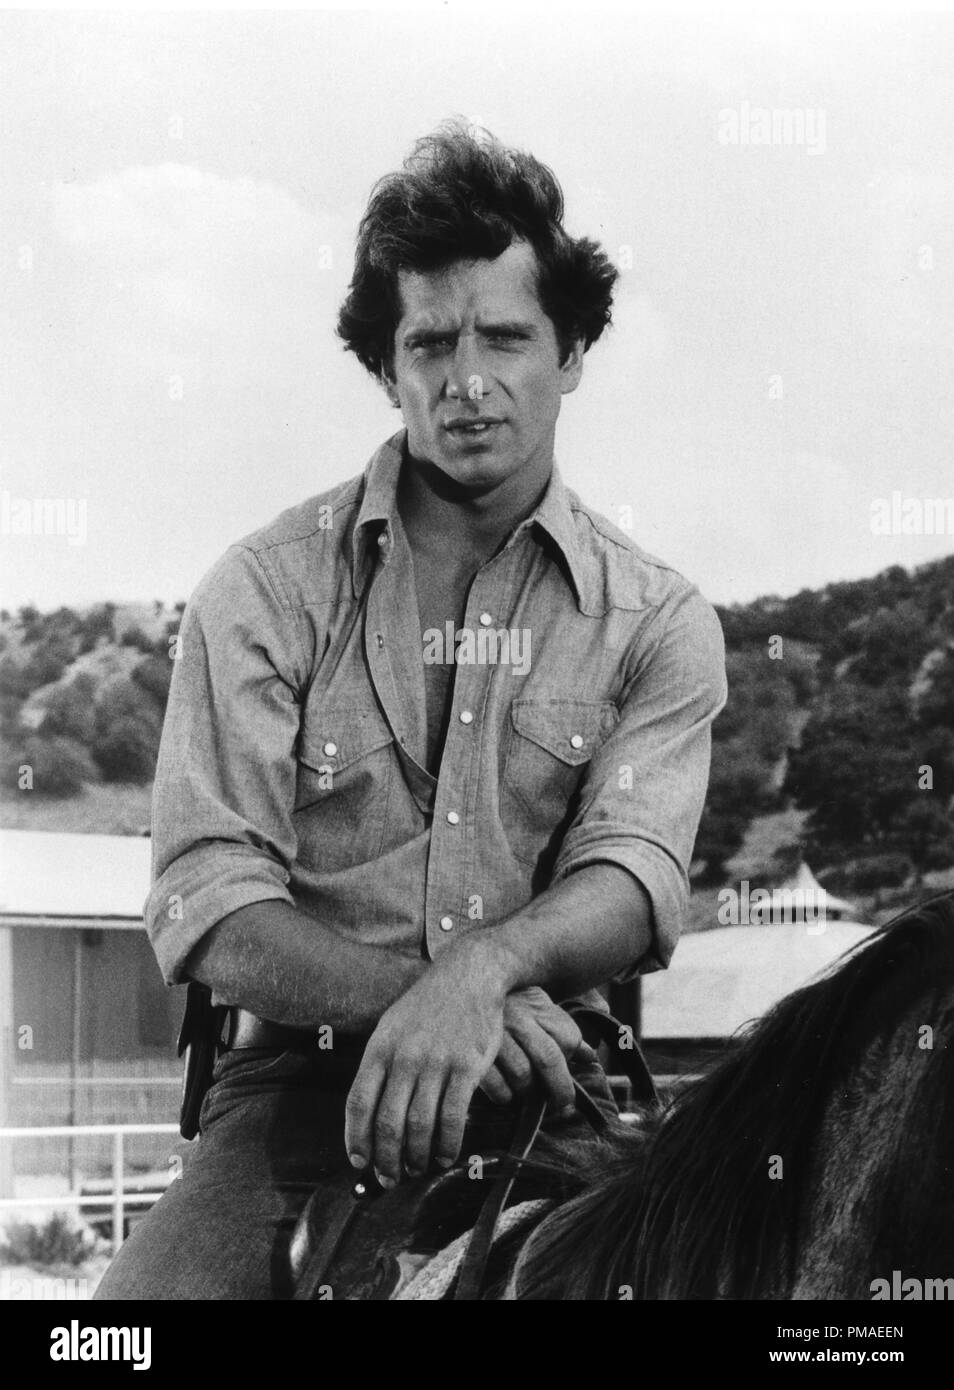 Tom Wopat, 'The Dukes of Hazzard', 1982 Warner Bros. Television  File Reference # 32509 846THA Stock Photo